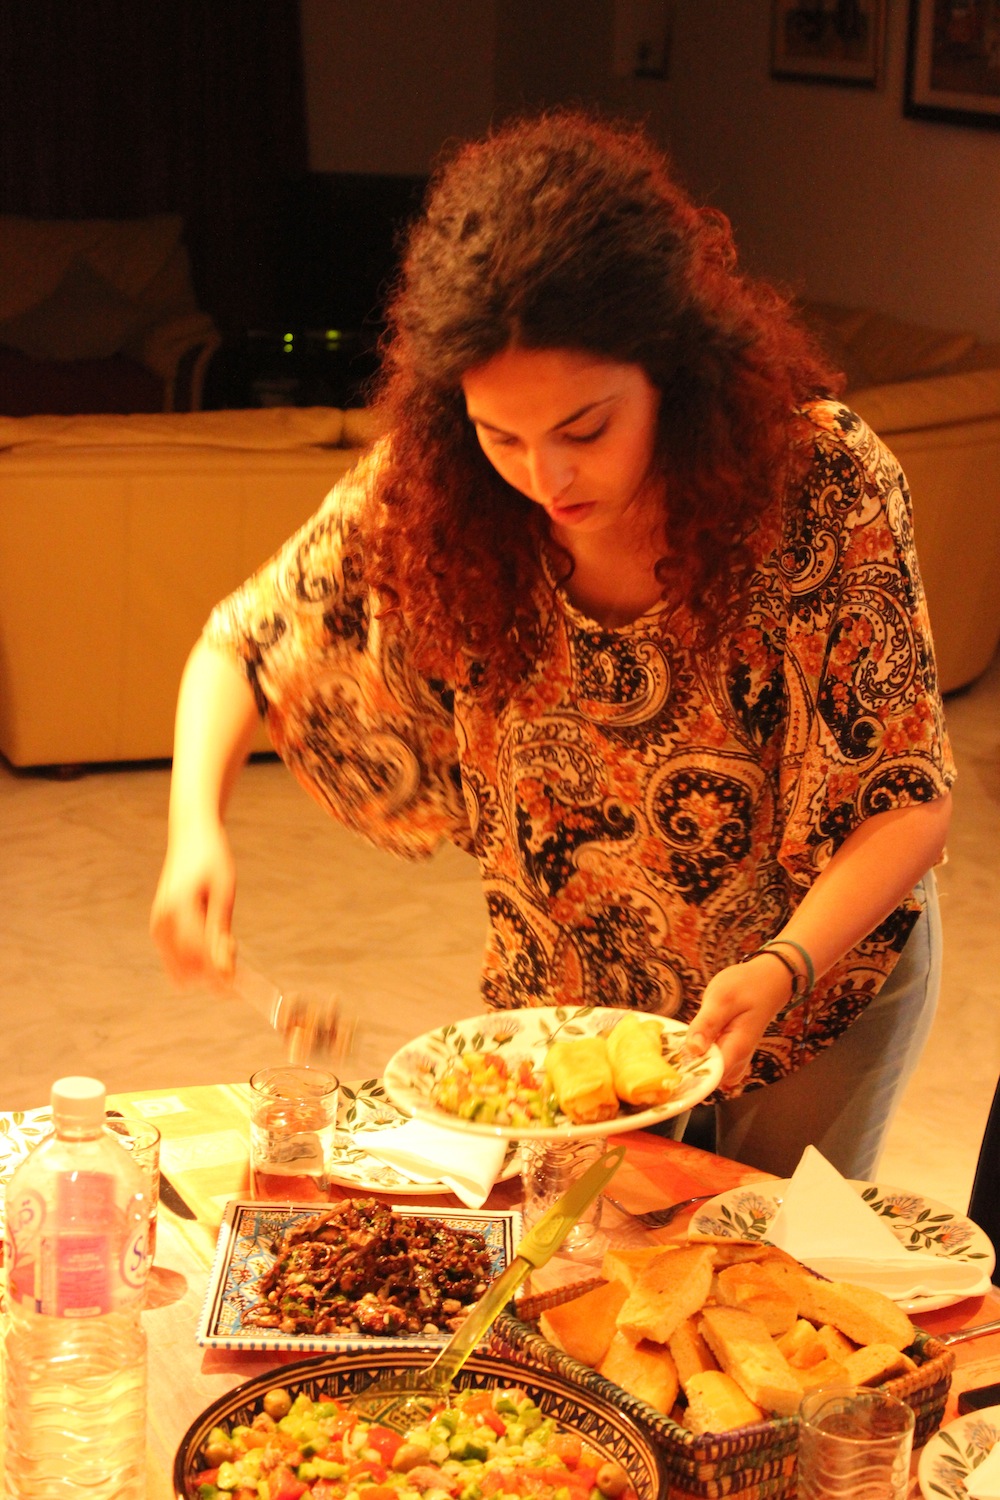 Tunisia Tour Culinary Experience Cooking together